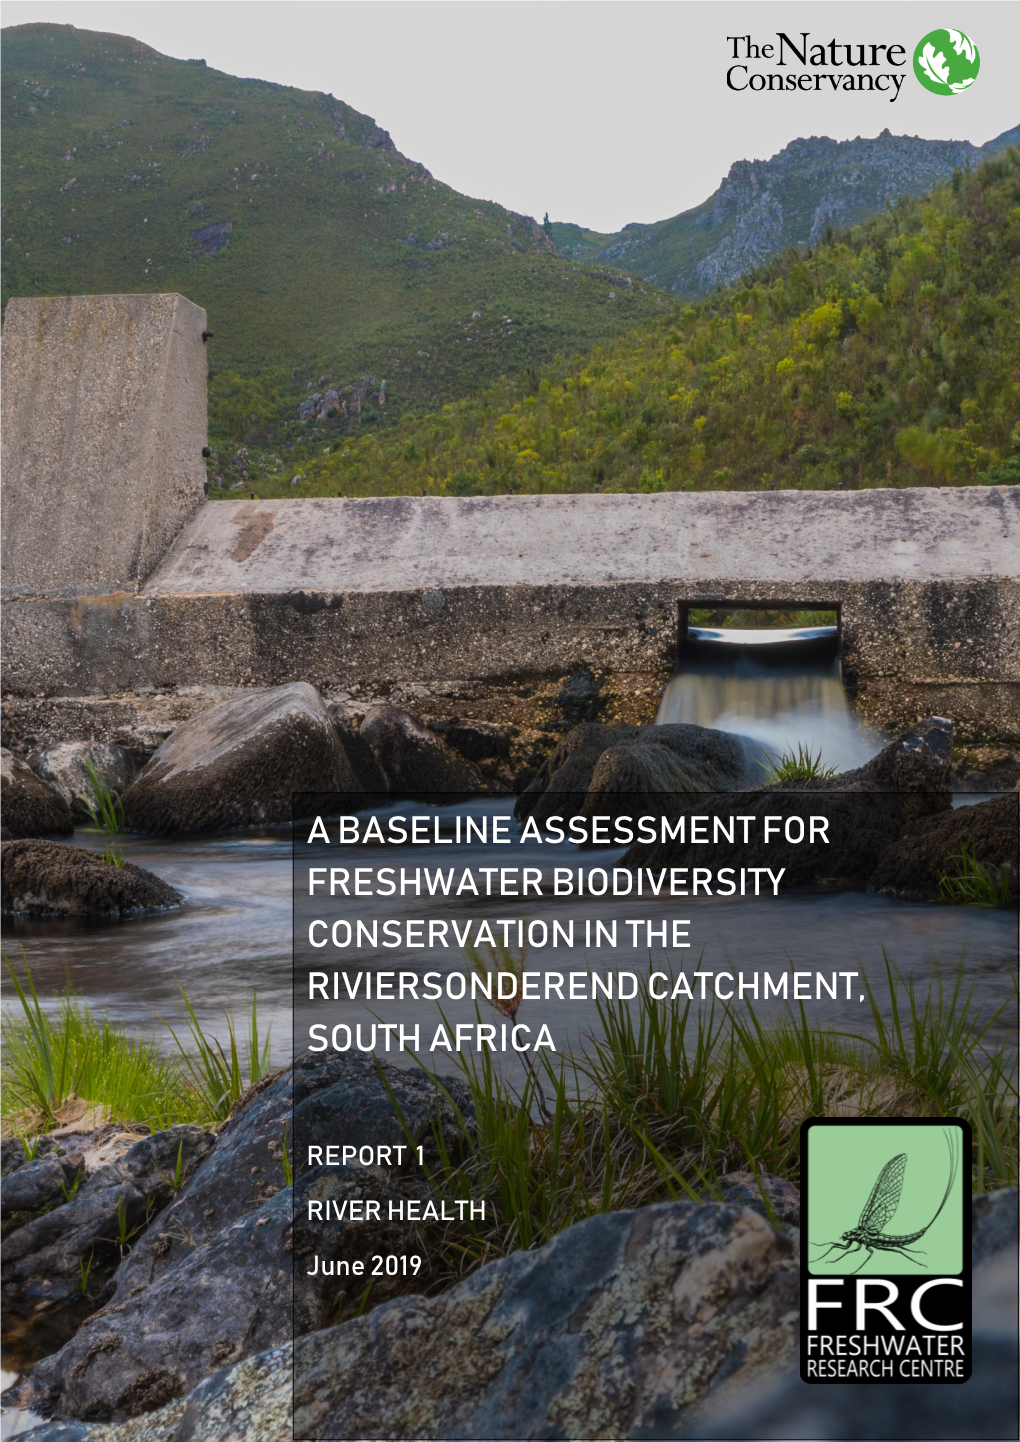 A Baseline Assessment for Freshwater Biodiversity Conservation in the Riviersonderend Catchment, South Africa